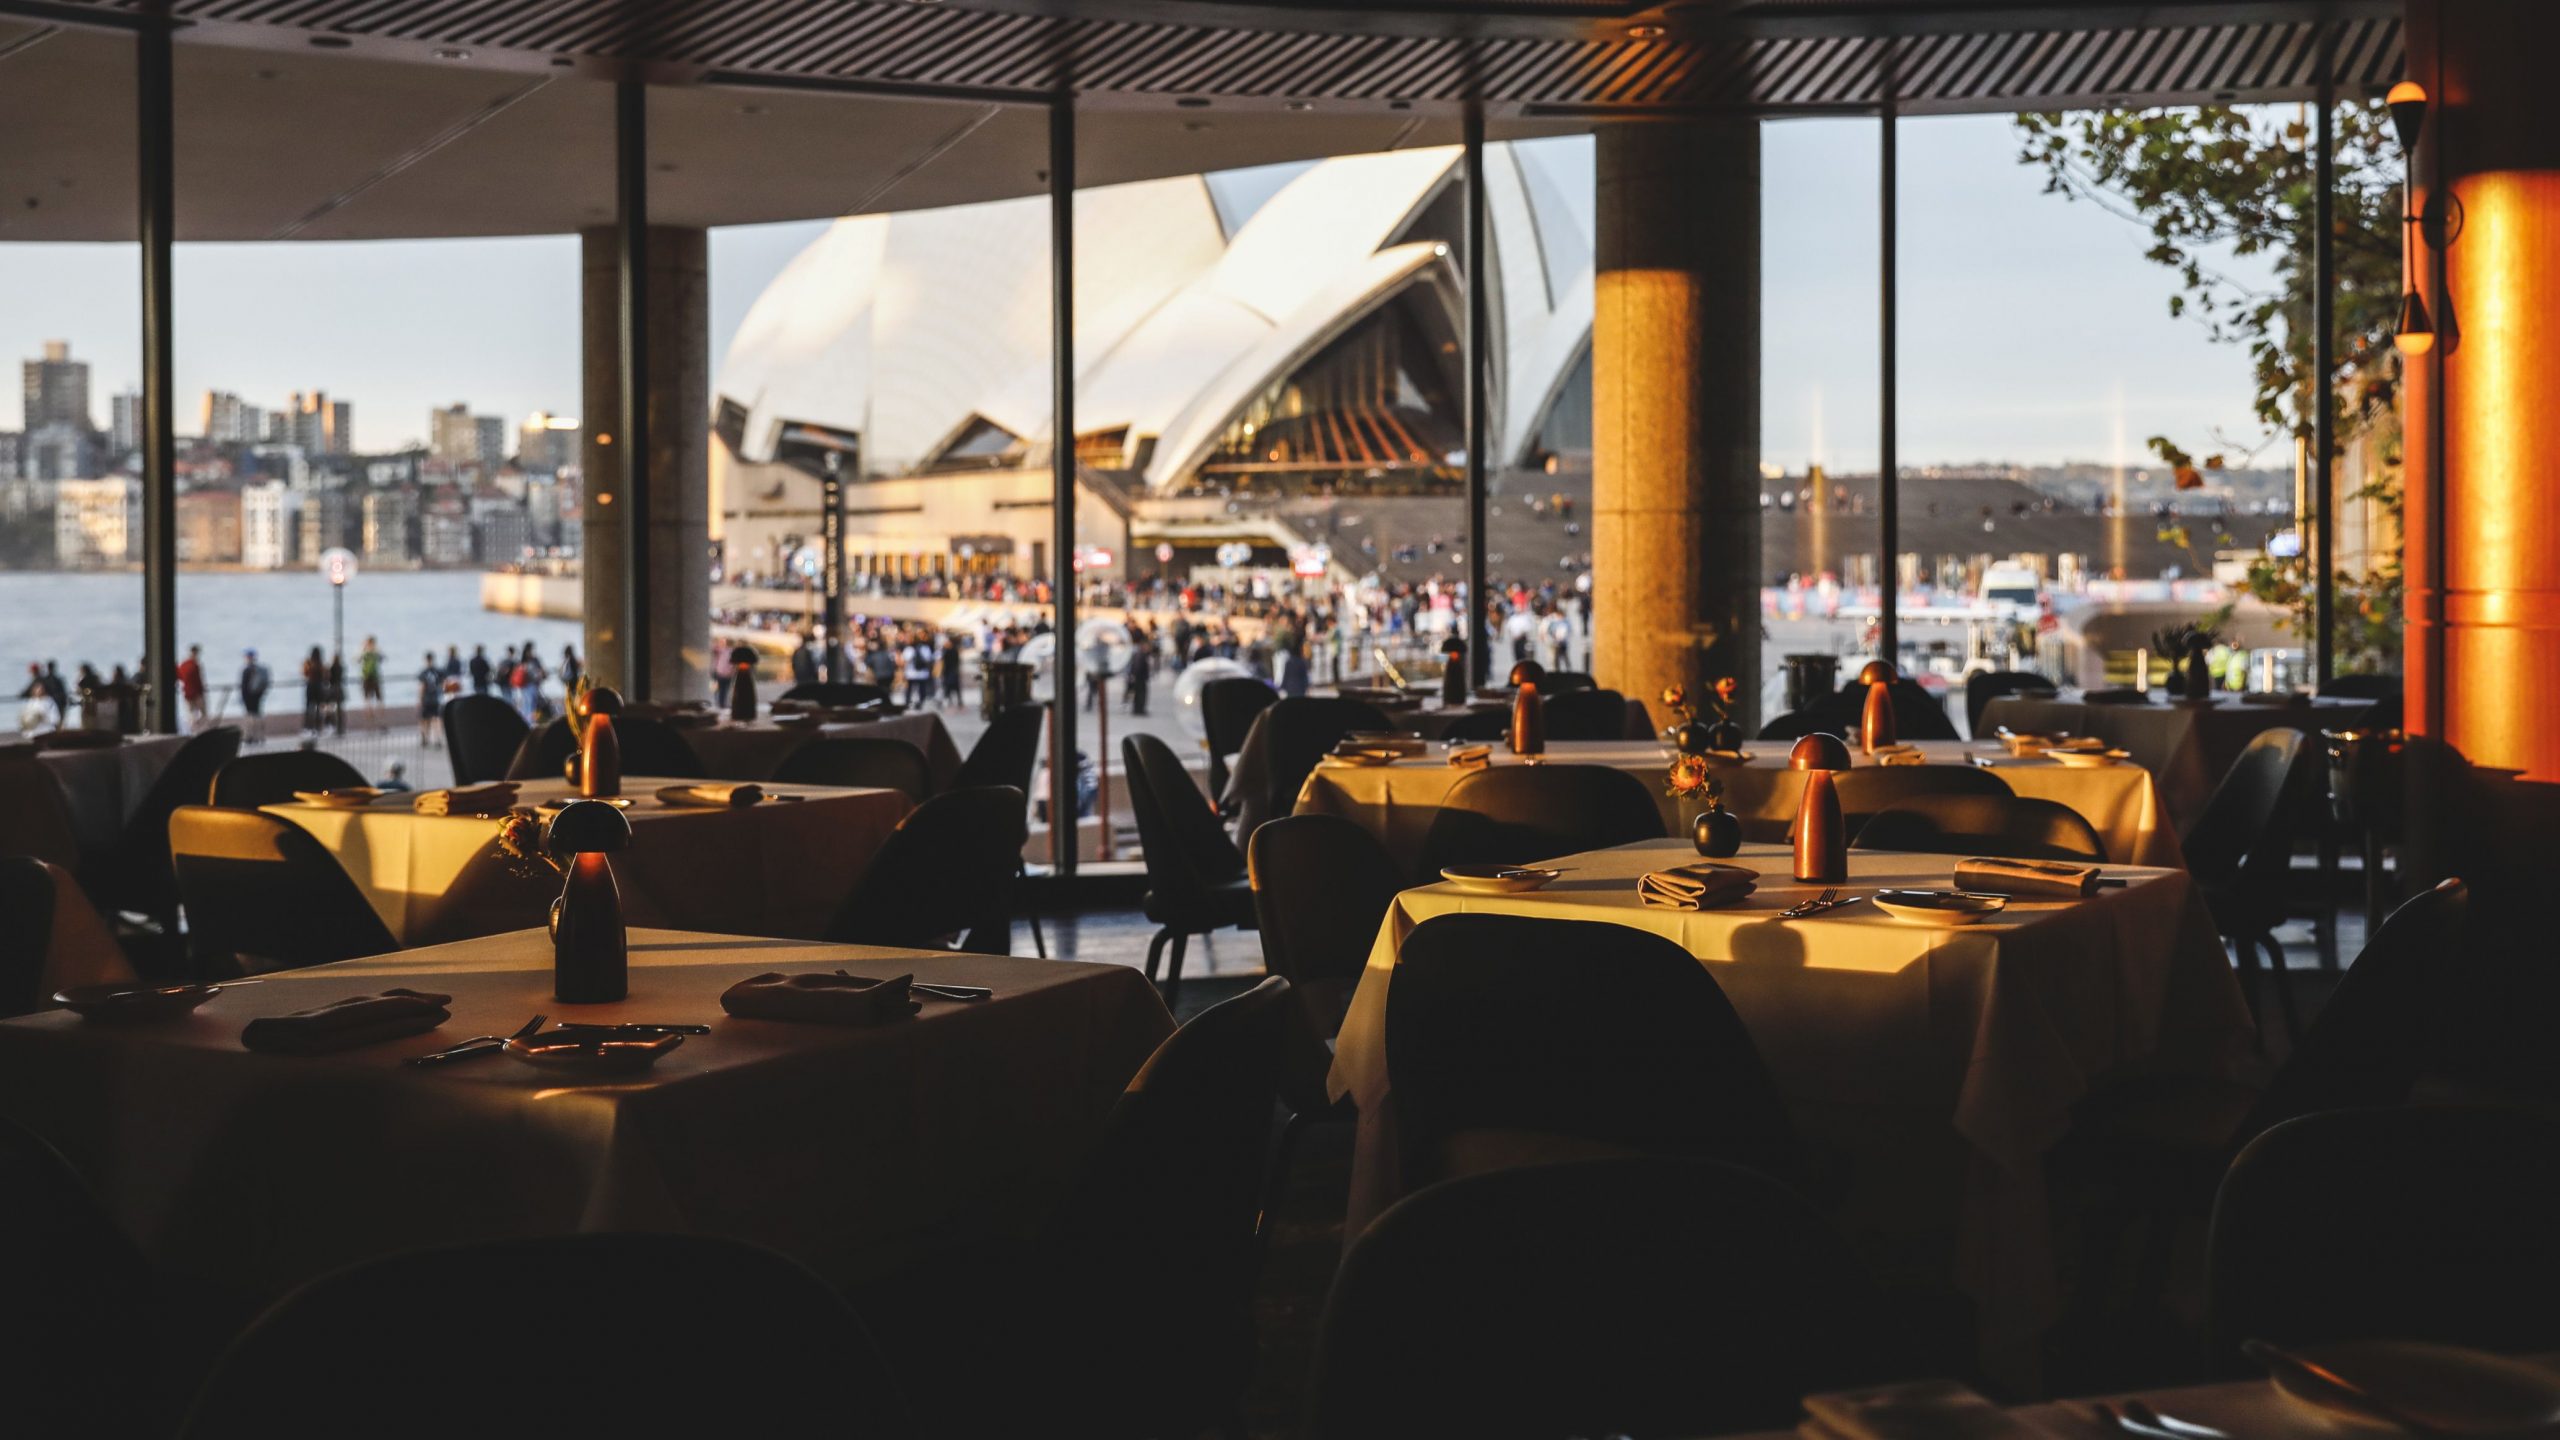 Where to Eat at Night in Sydney